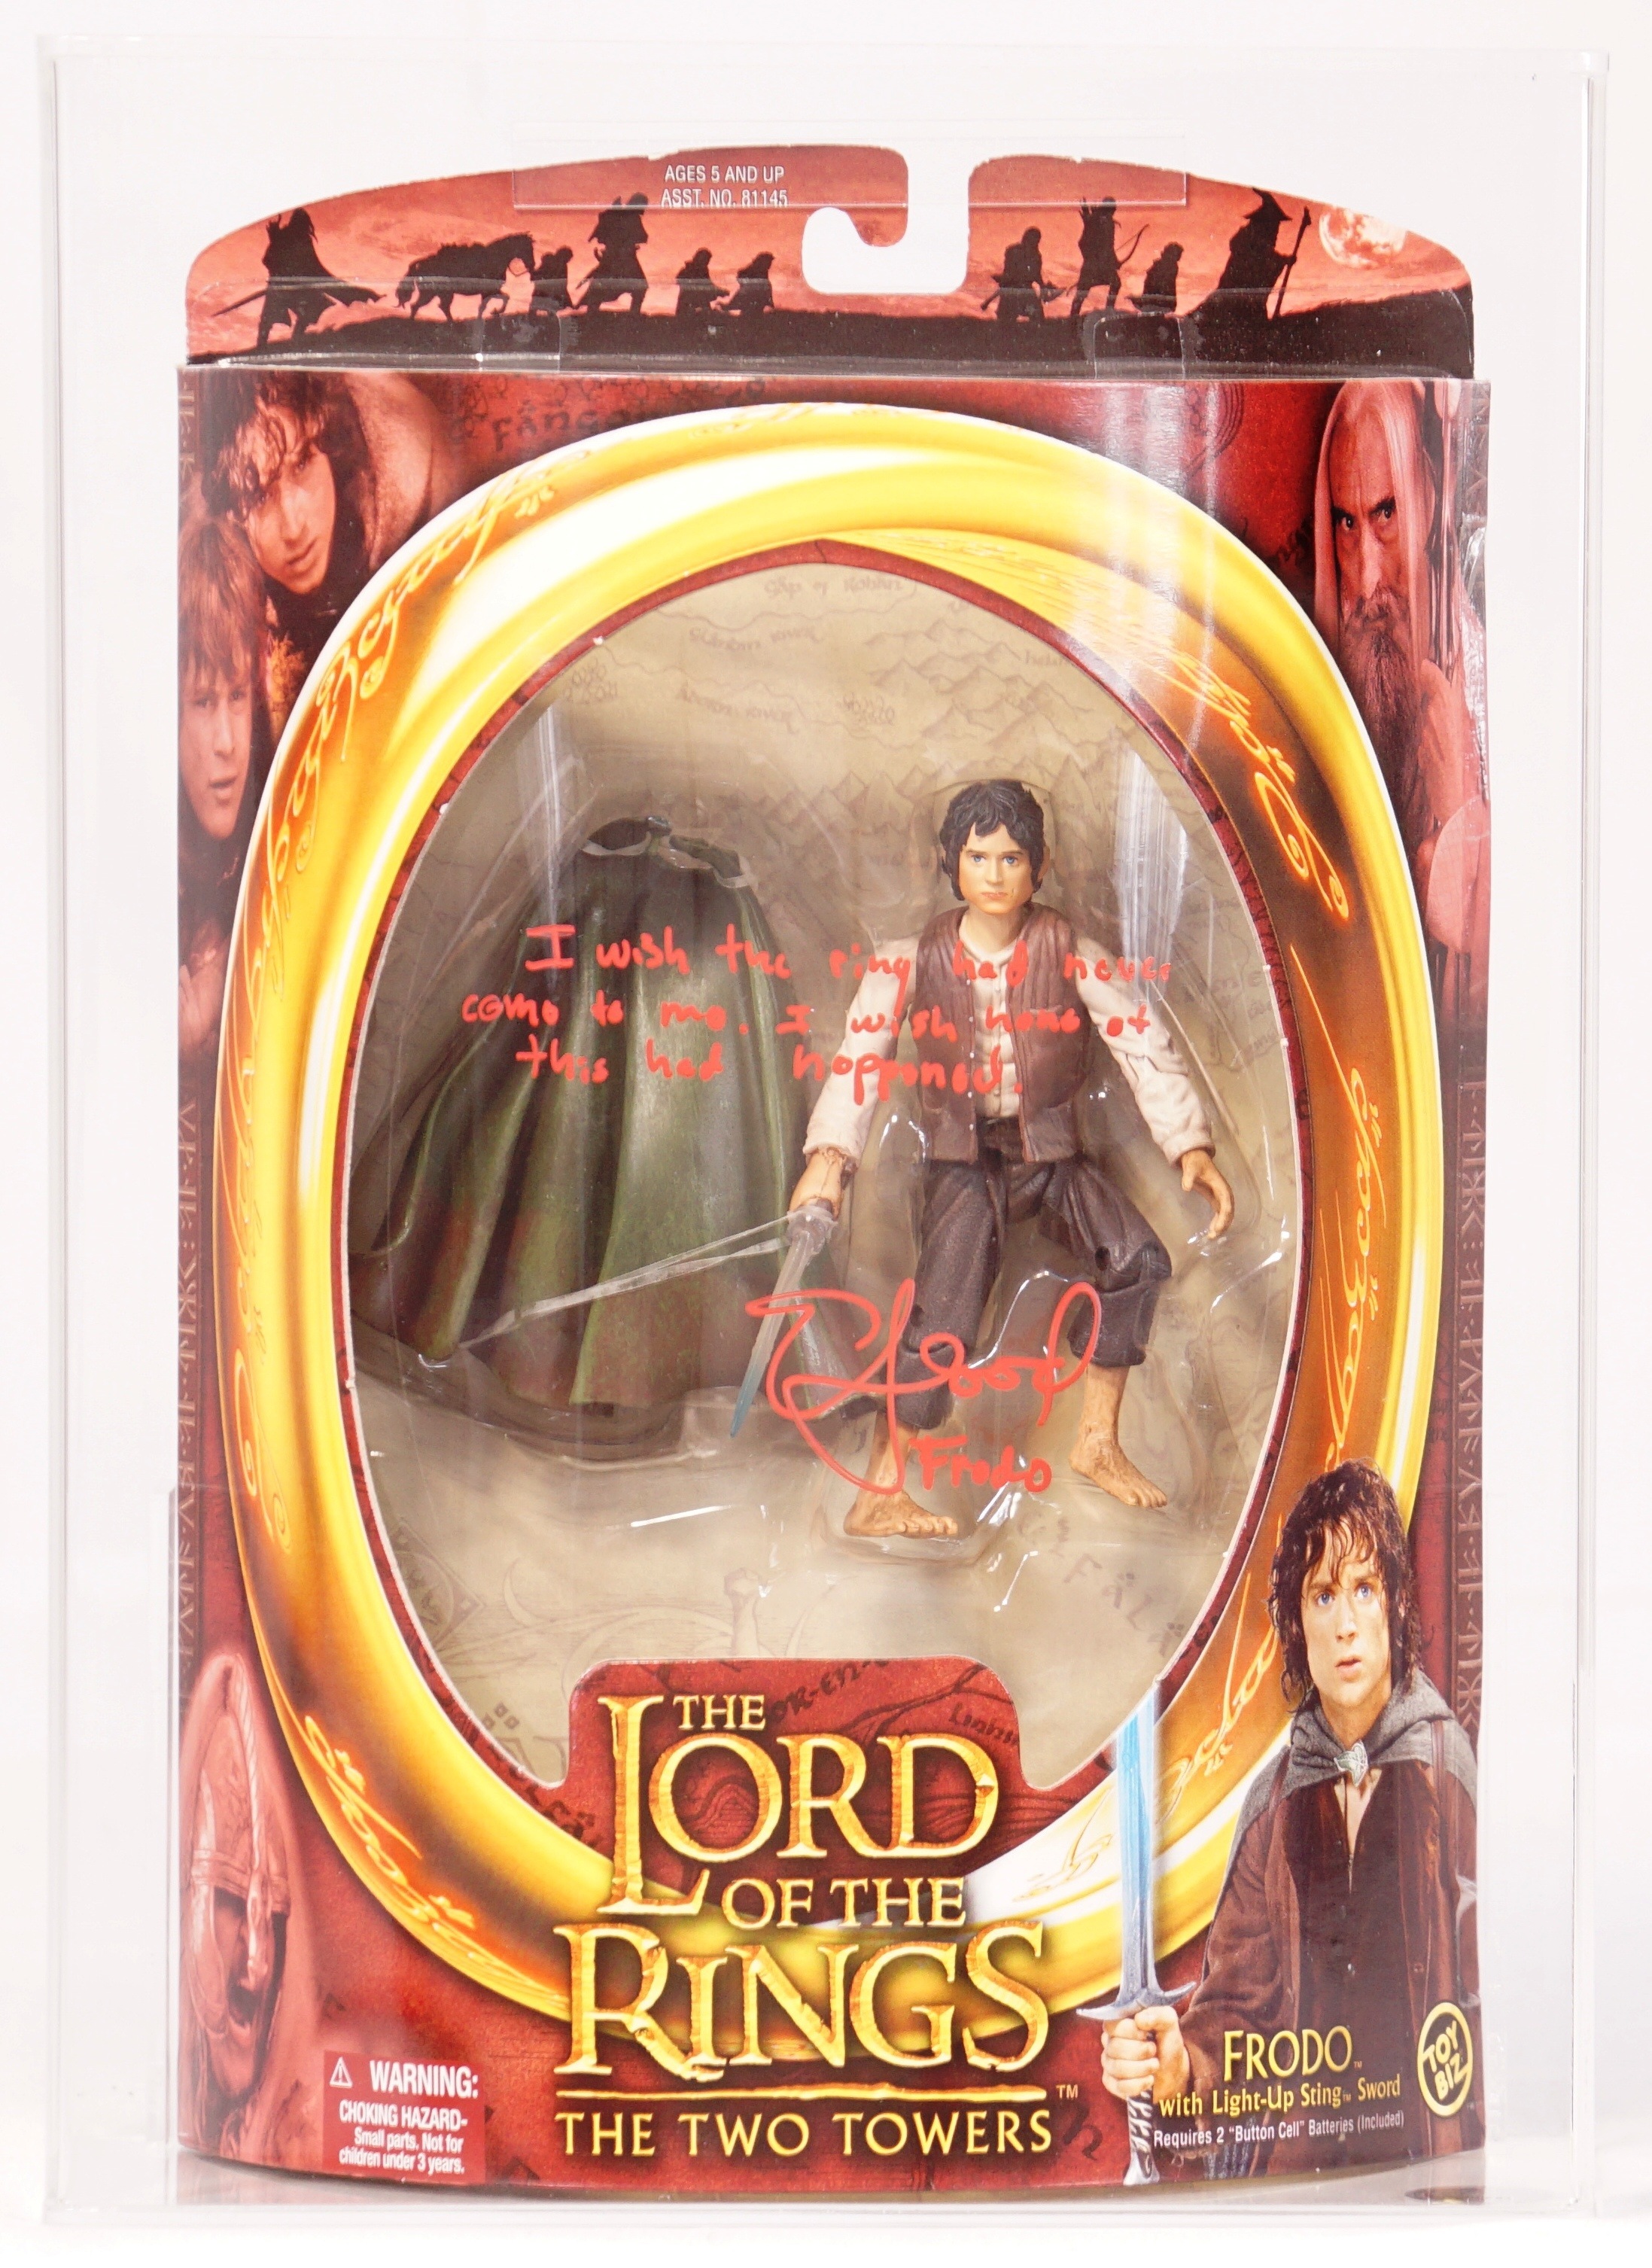 CUSTOM 2002 Toy Biz Lord of the Rings Boxed Action Figure - Frodo